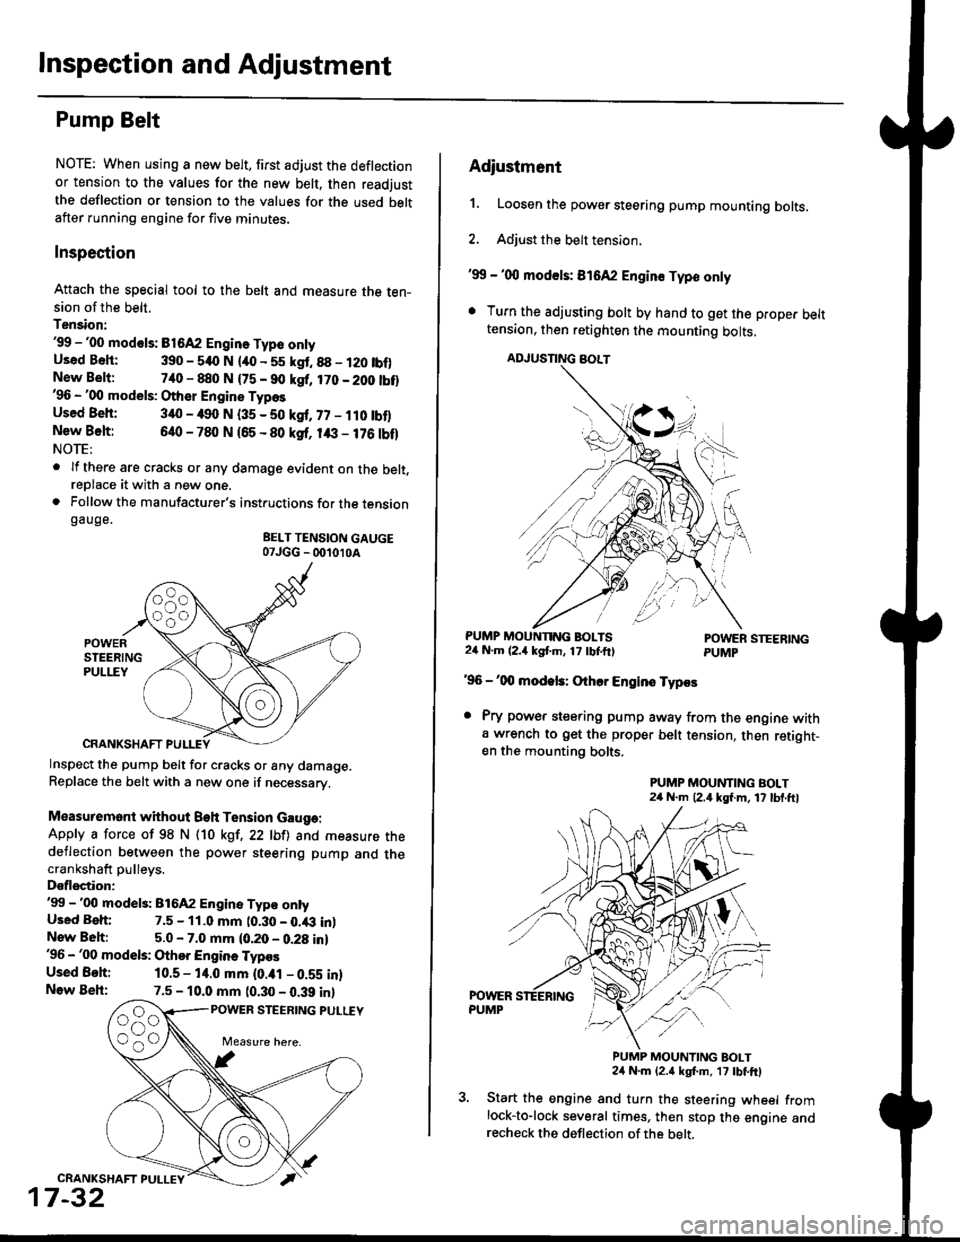 HONDA CIVIC 1998 6.G Workshop Manual Inspection and Adjustment
Pump Belt
NOTE: When using a new belt, first adjust the deflection
or tension to the values for the new belt, then readjust
the deflection or tension to the values for the us